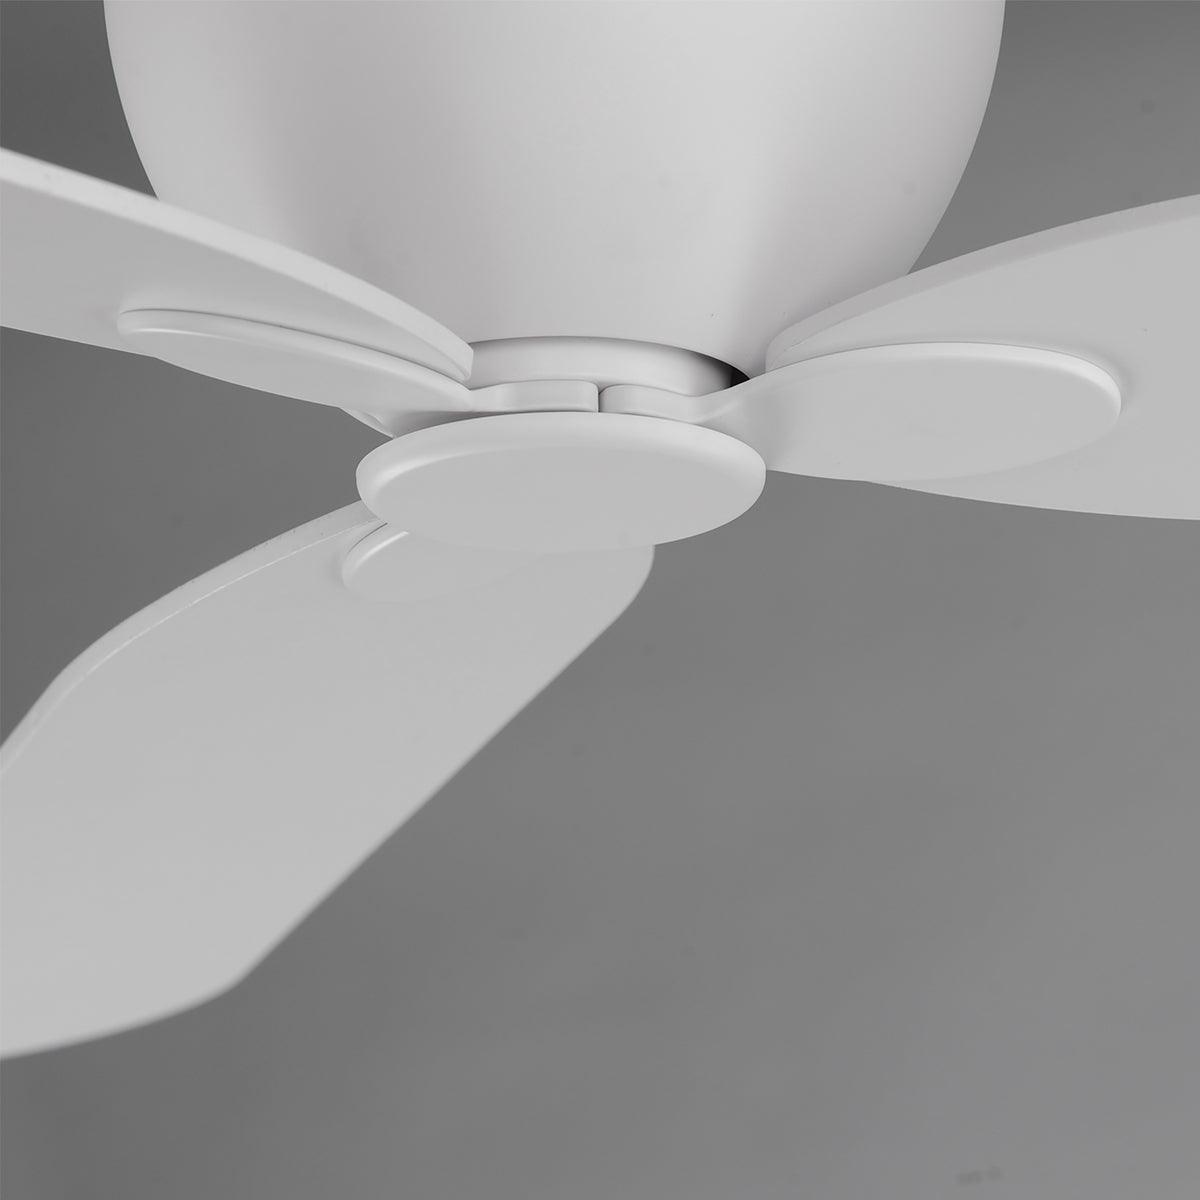 Lowell 52 Inch 3-Blade Hugger Ceiling Fan With Wall Control, Matte White Finish - Bees Lighting